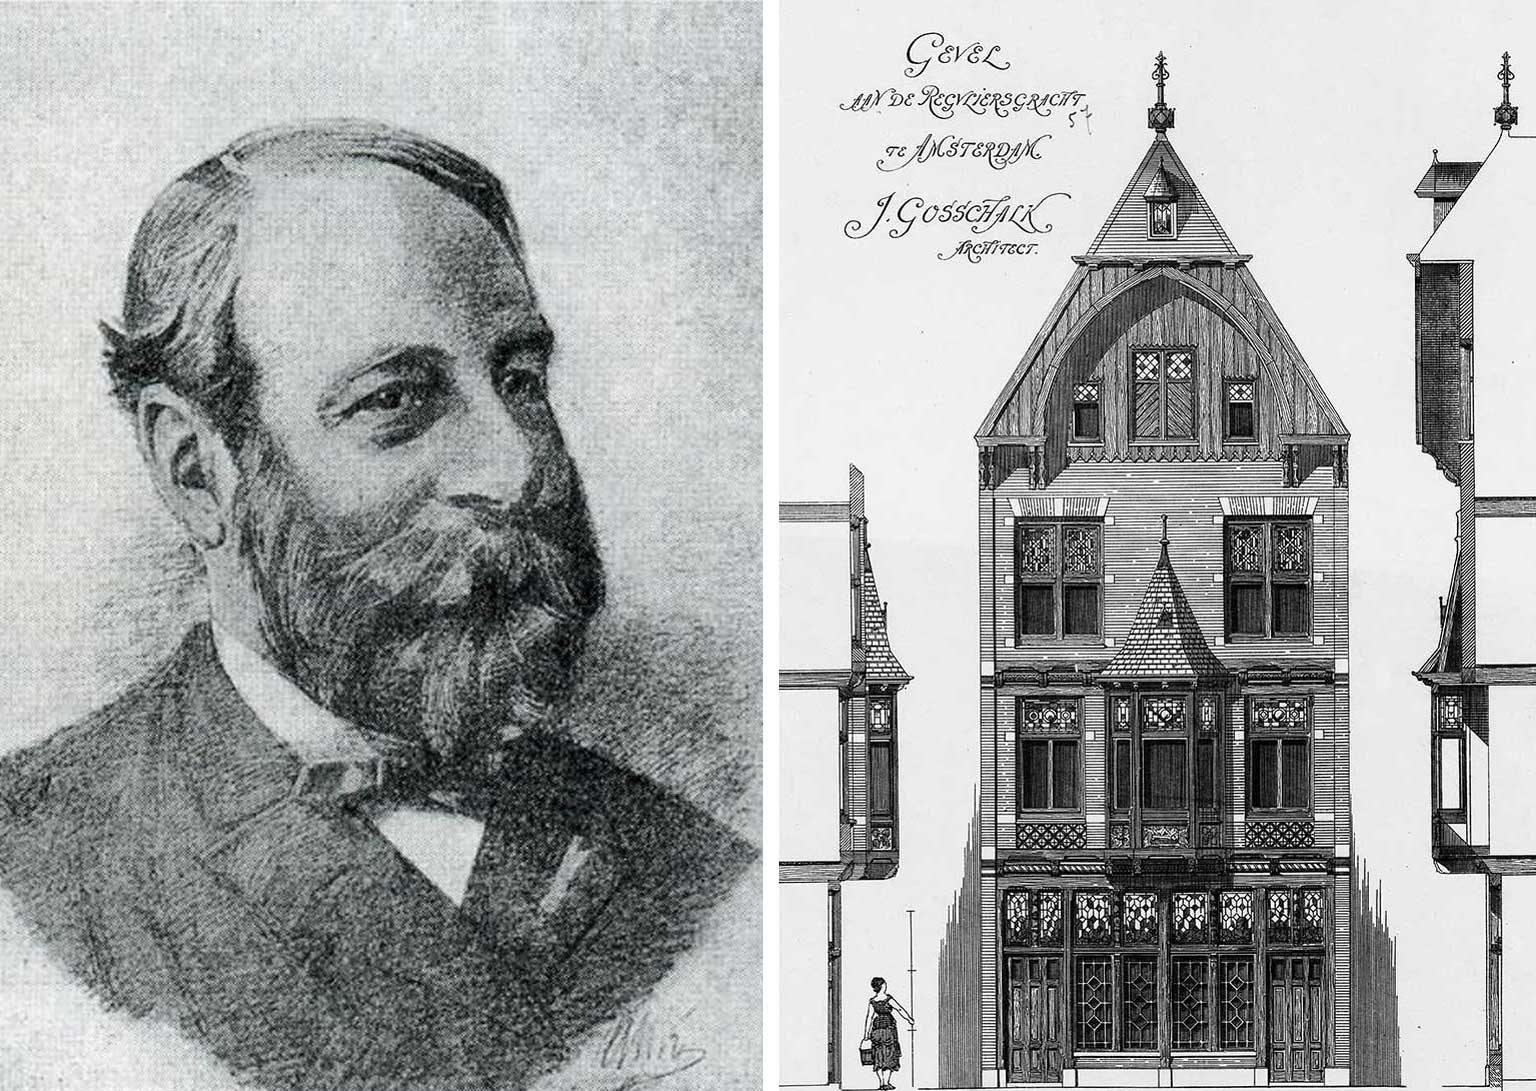 Portrait of archtiect Isaac Gosschalk and his drawing of the front of Reguliersgracht 57, Amsterdam